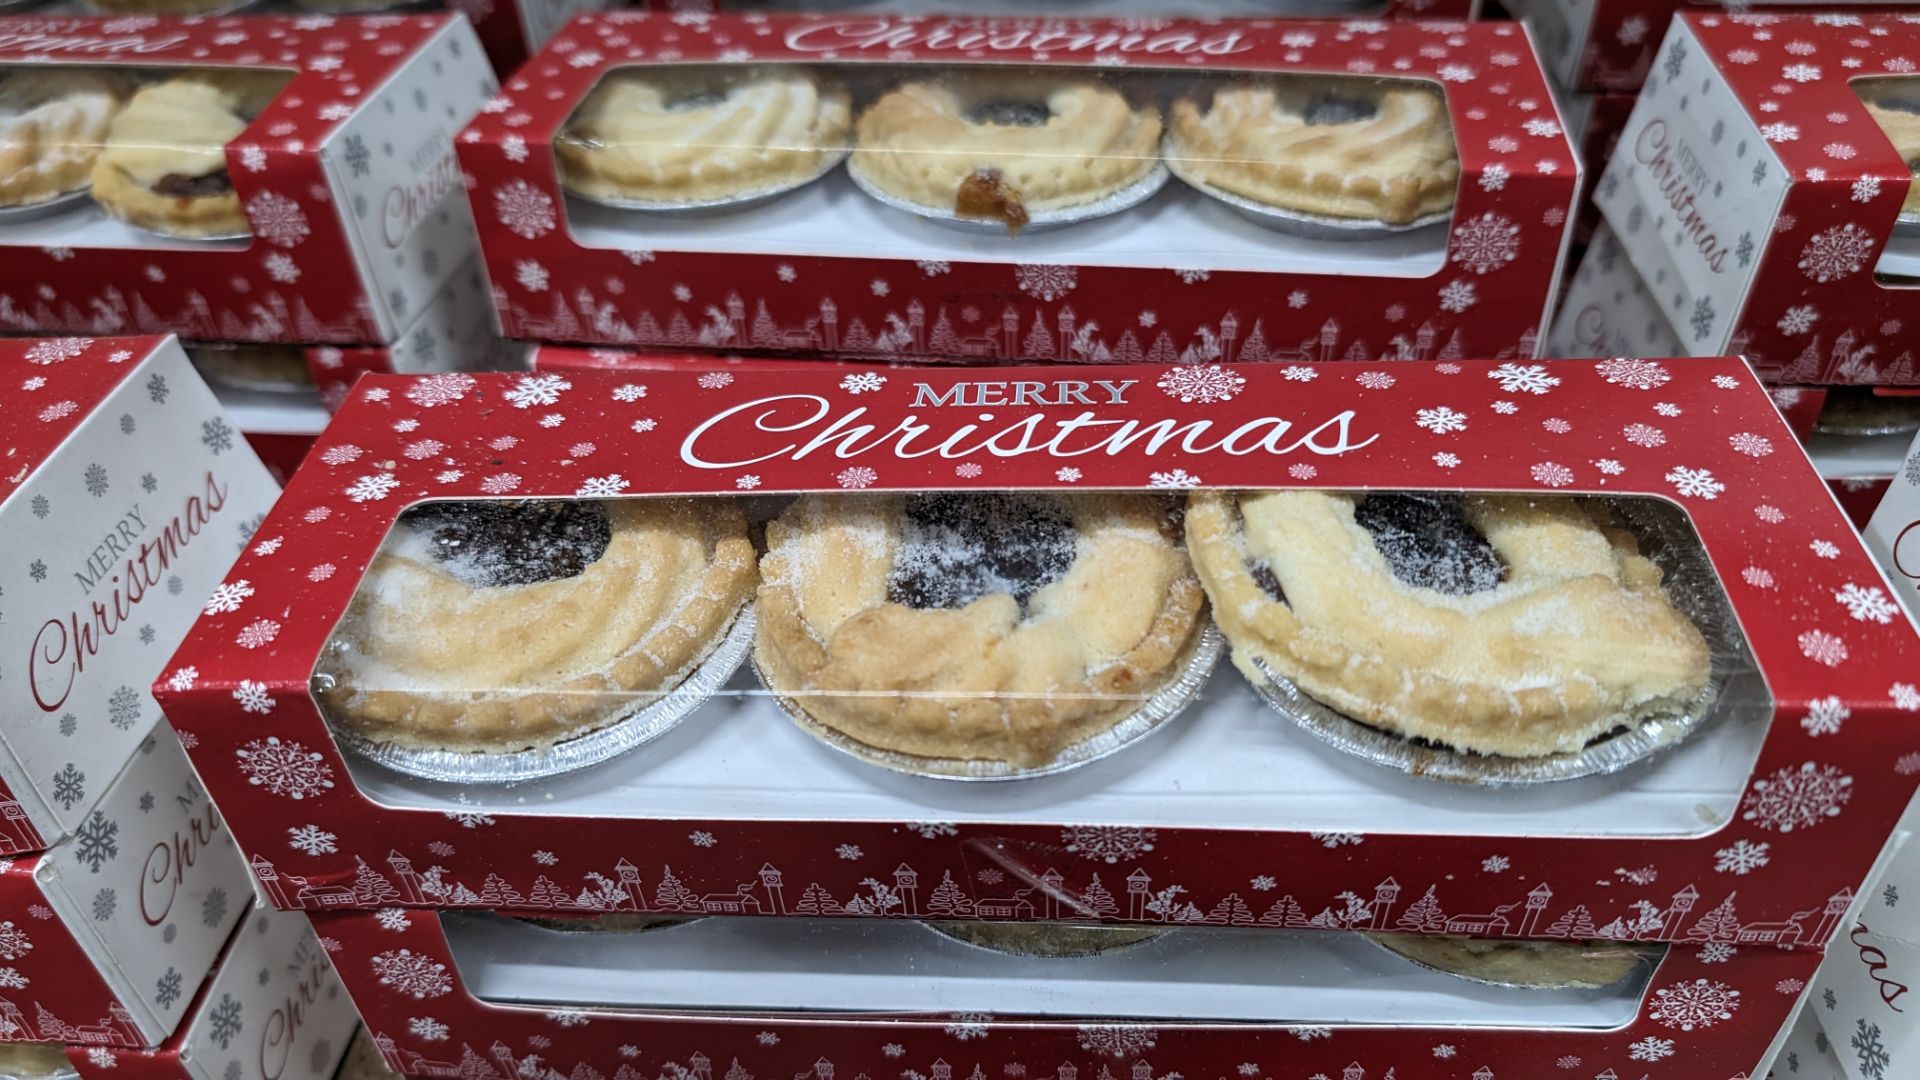 40 off 6 packs of Christmas mince pies. Each pack contains 6 pies on 2 layers & comes in Merry Chri - Image 10 of 10